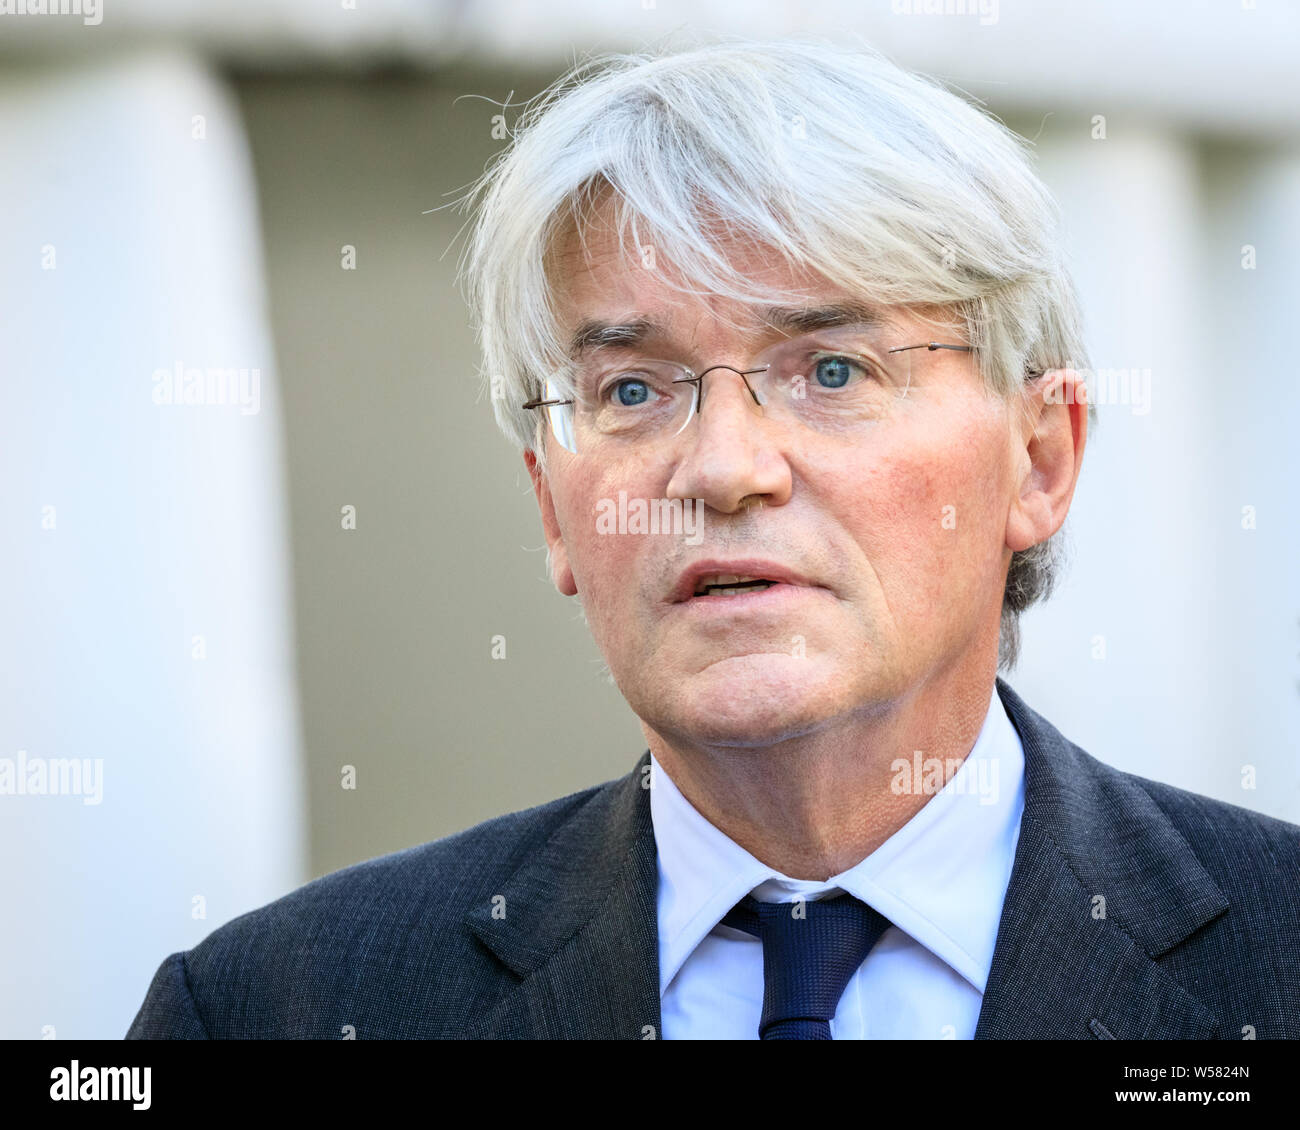 Andrew Mitchell Mp Conservative Party Member Of Parliament For Royal Sutton Coldfield Face